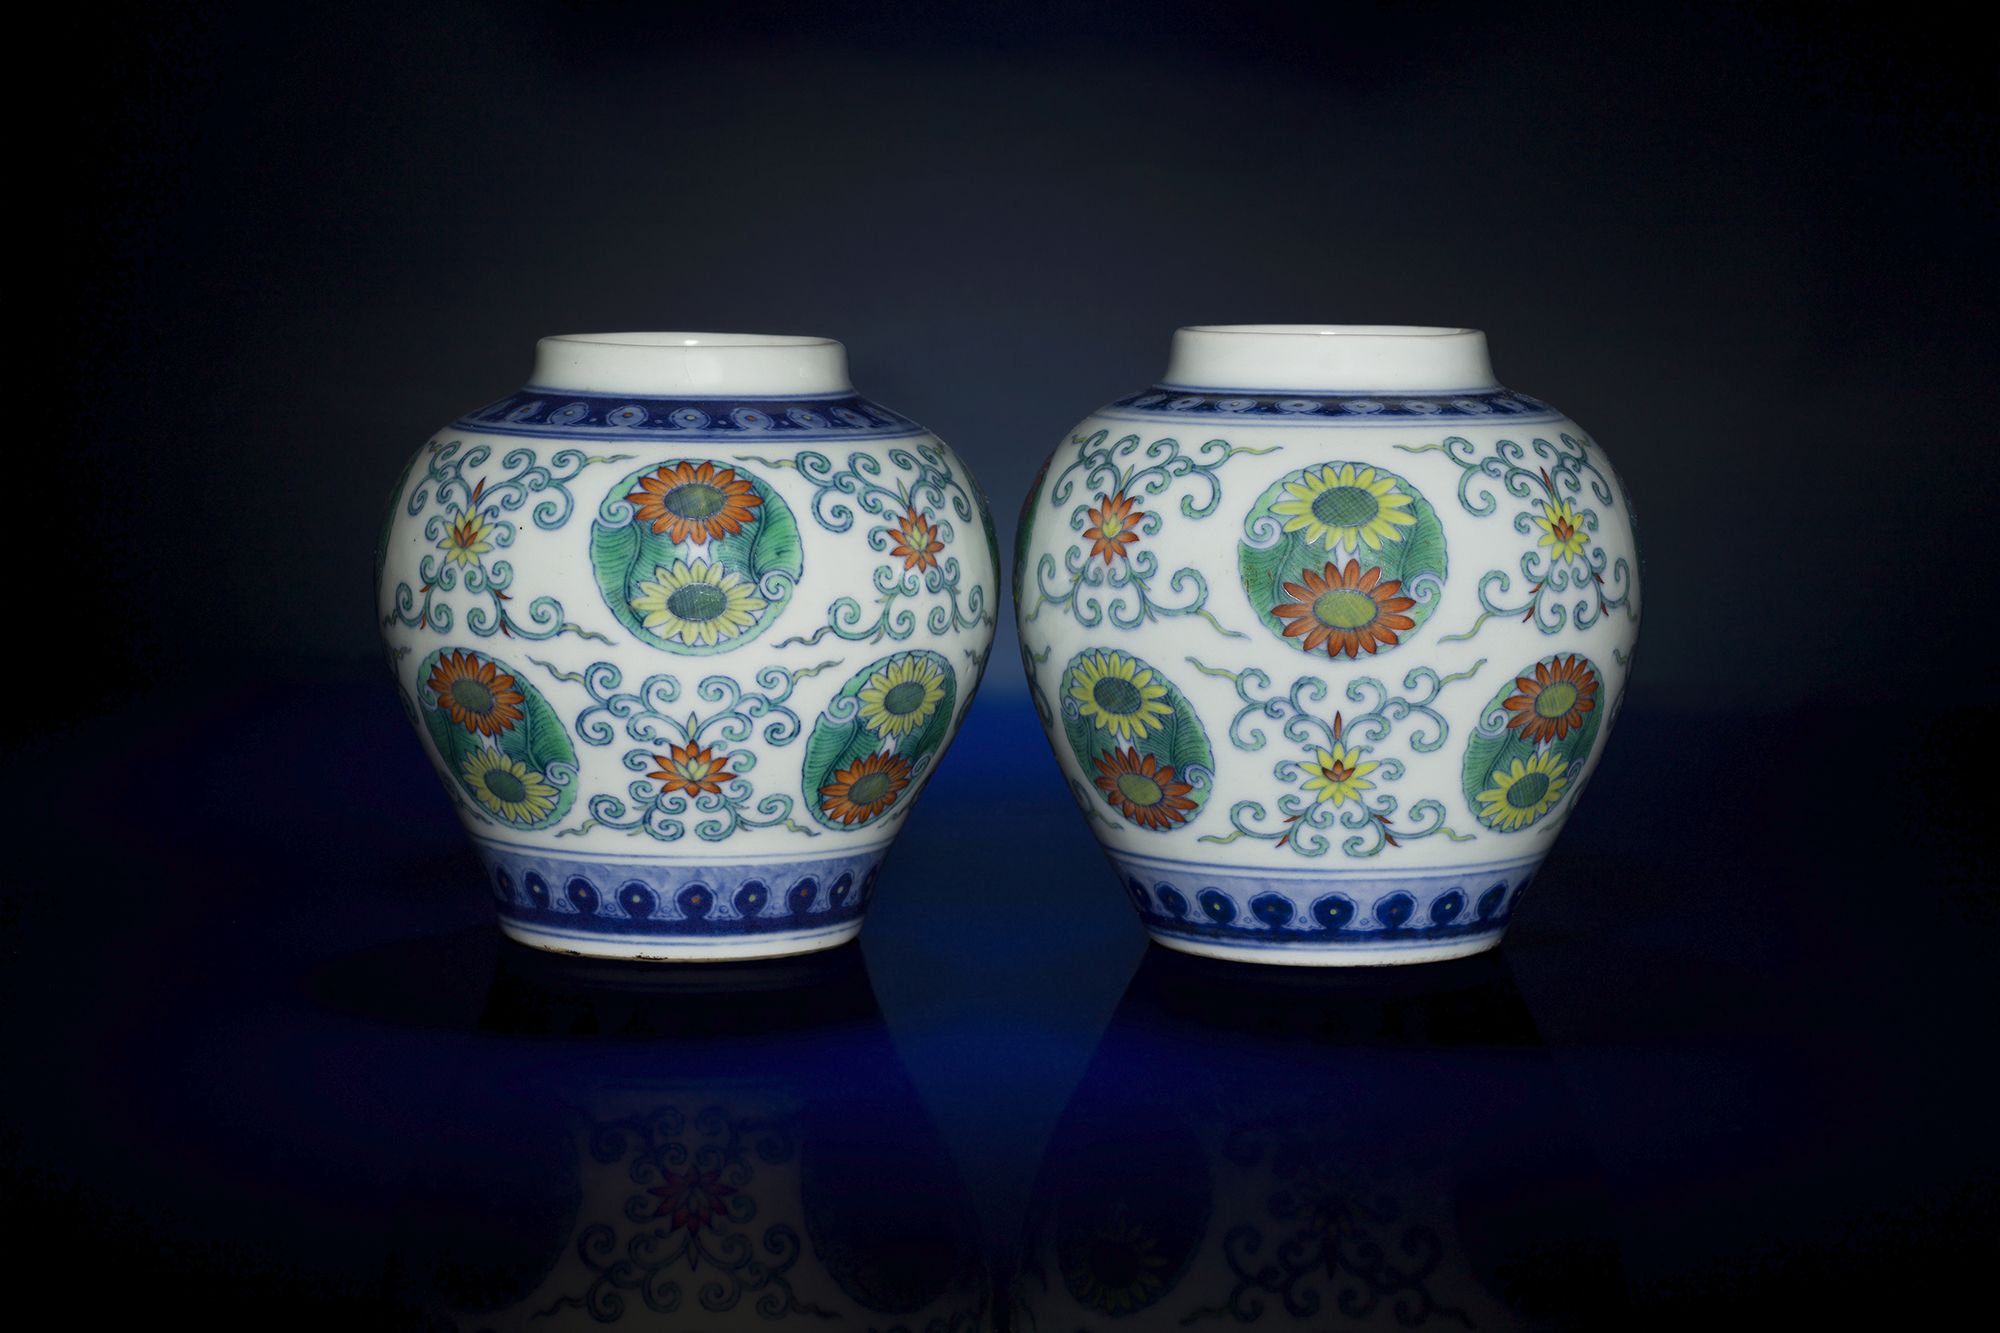 Chinese Porcelain Ginger Jars - Everything You Need to Know